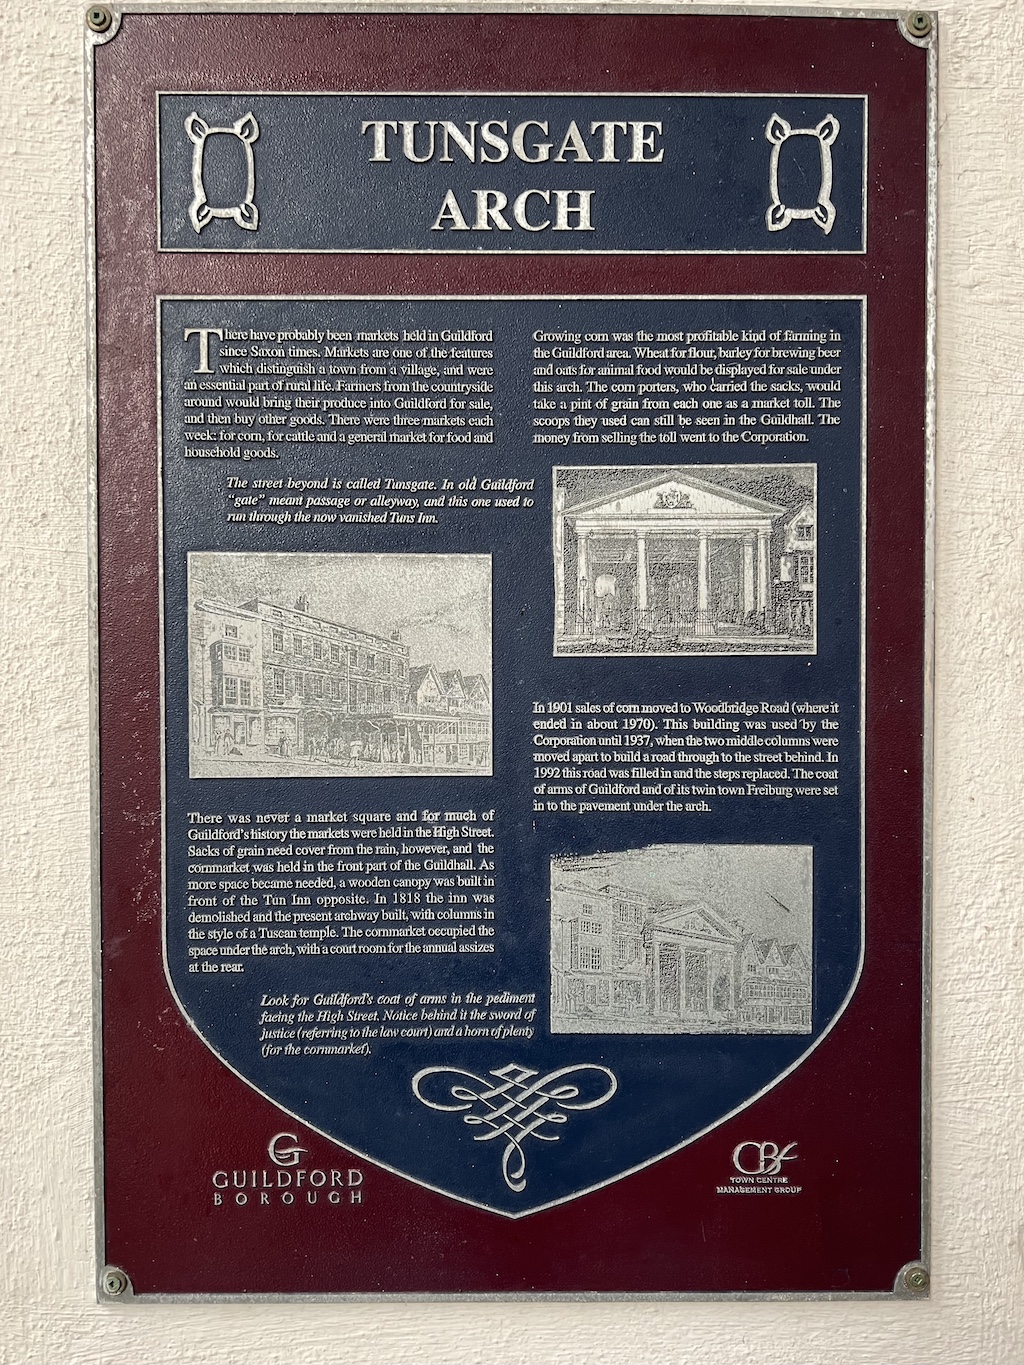 Blue plaque in Guildford for Tunsgate Arch